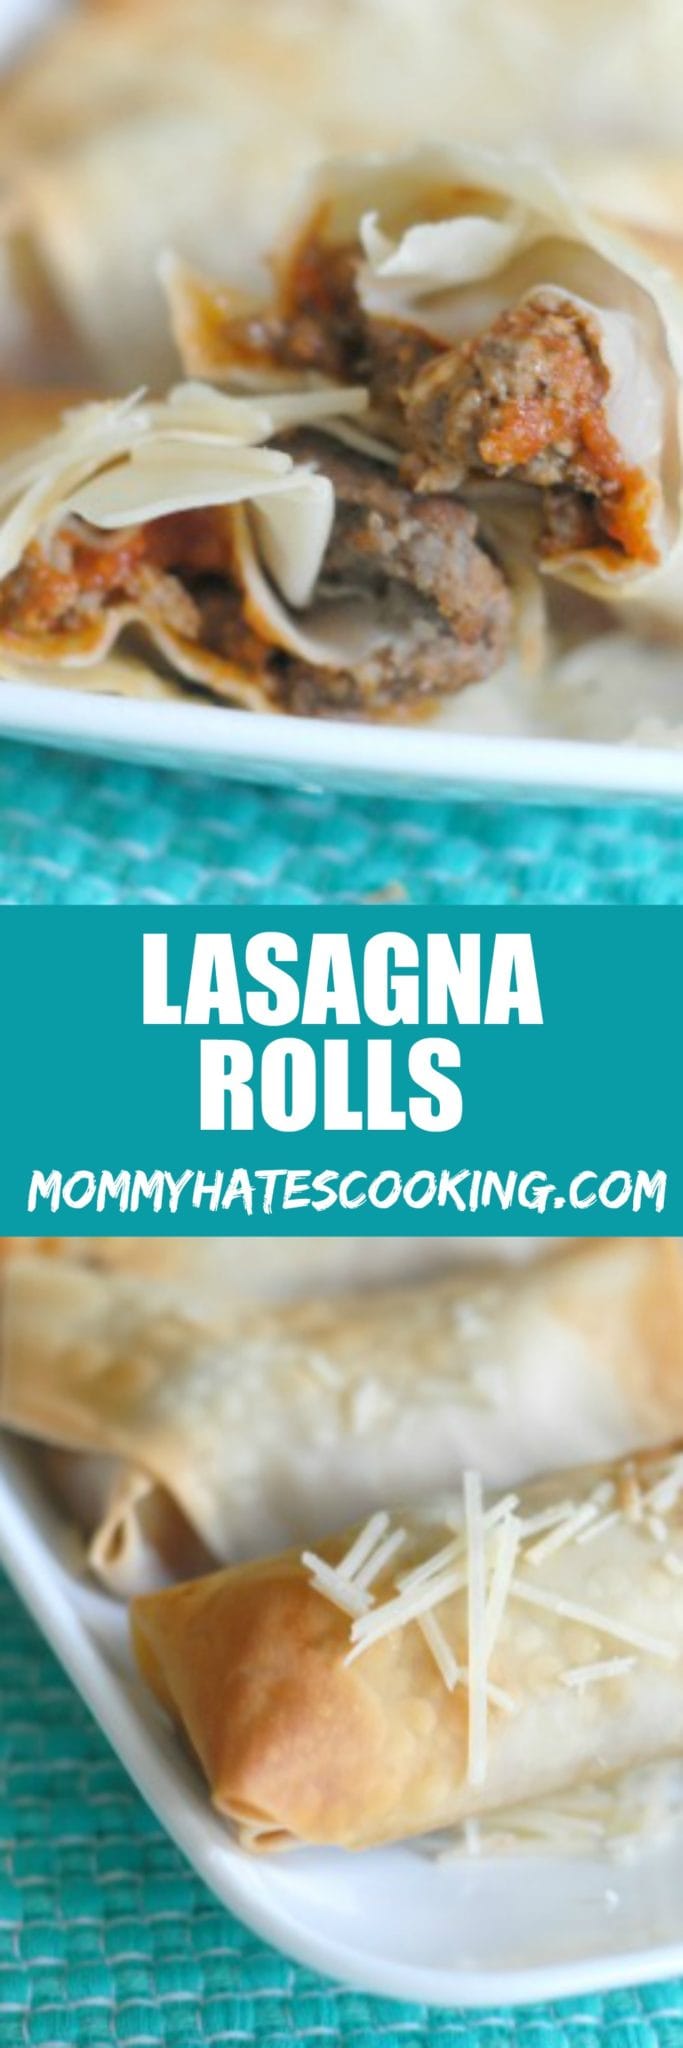 Lasagna Rolls - Mommy Hates Cooking